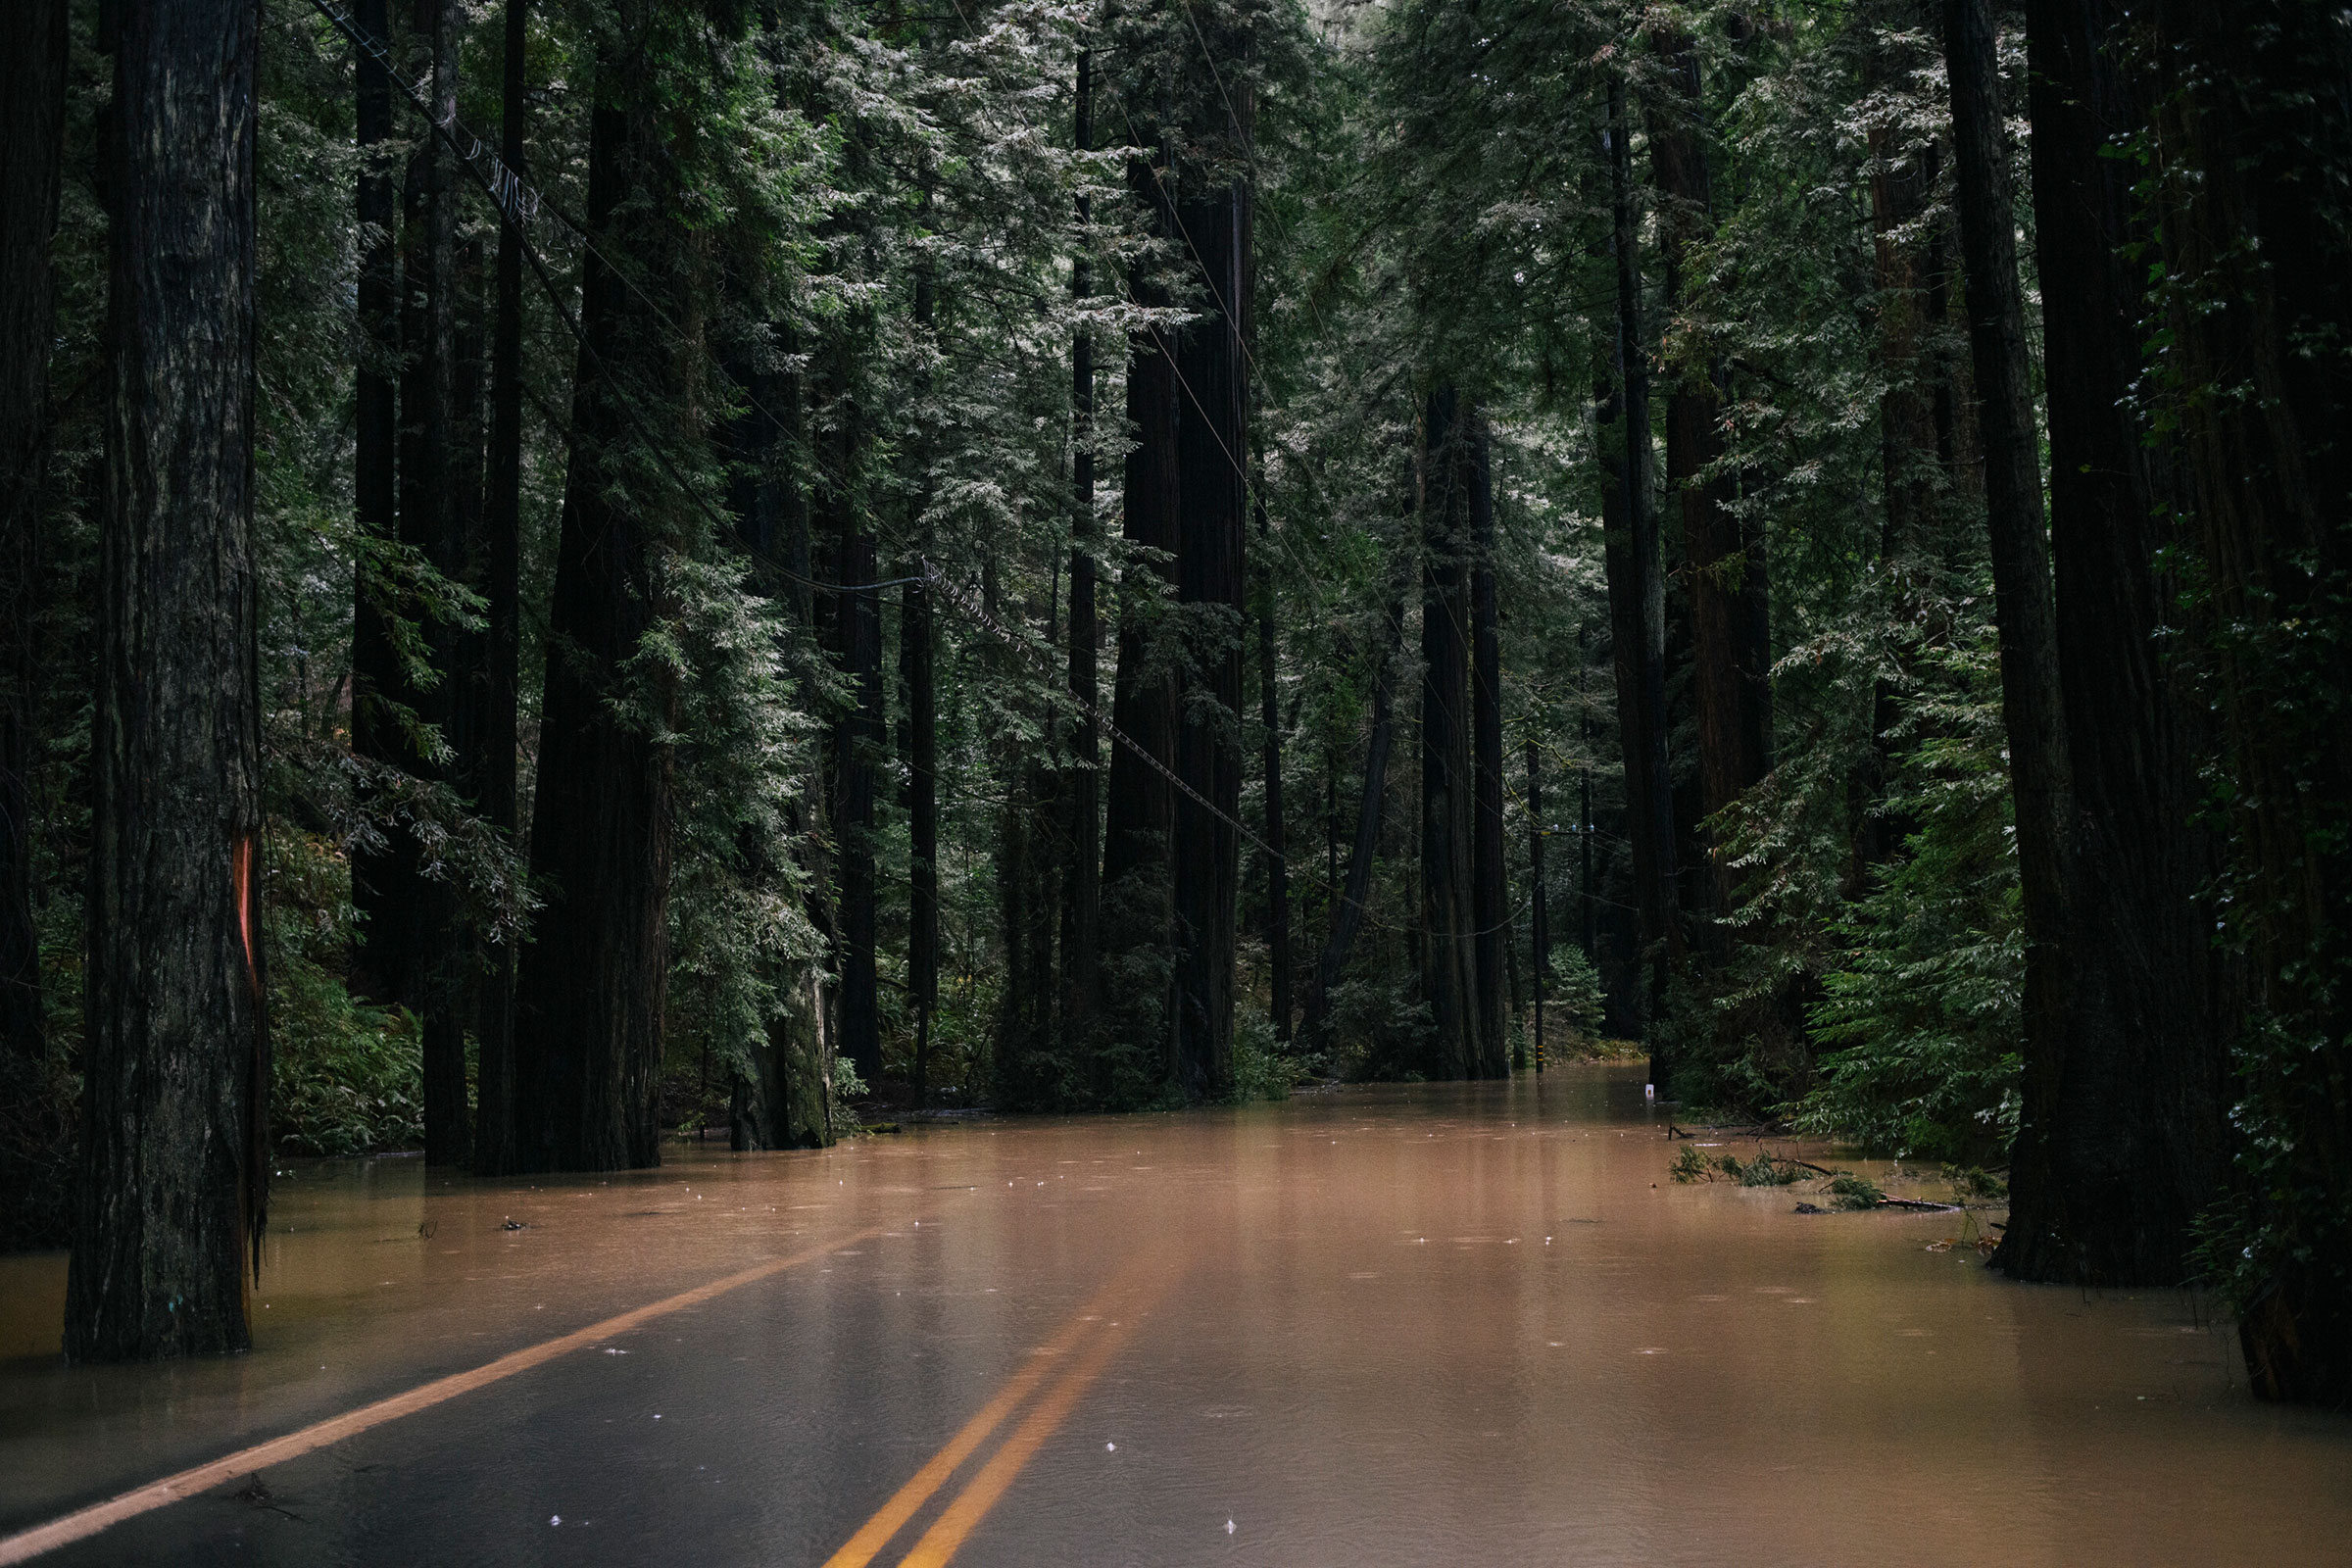 The Avenue of the Giants in Humboldt county is closed due to flooding, in Redcrest, Calif. on Friday, Jan. 13, 2023. (Alexandra Hootnick/The New York Times)